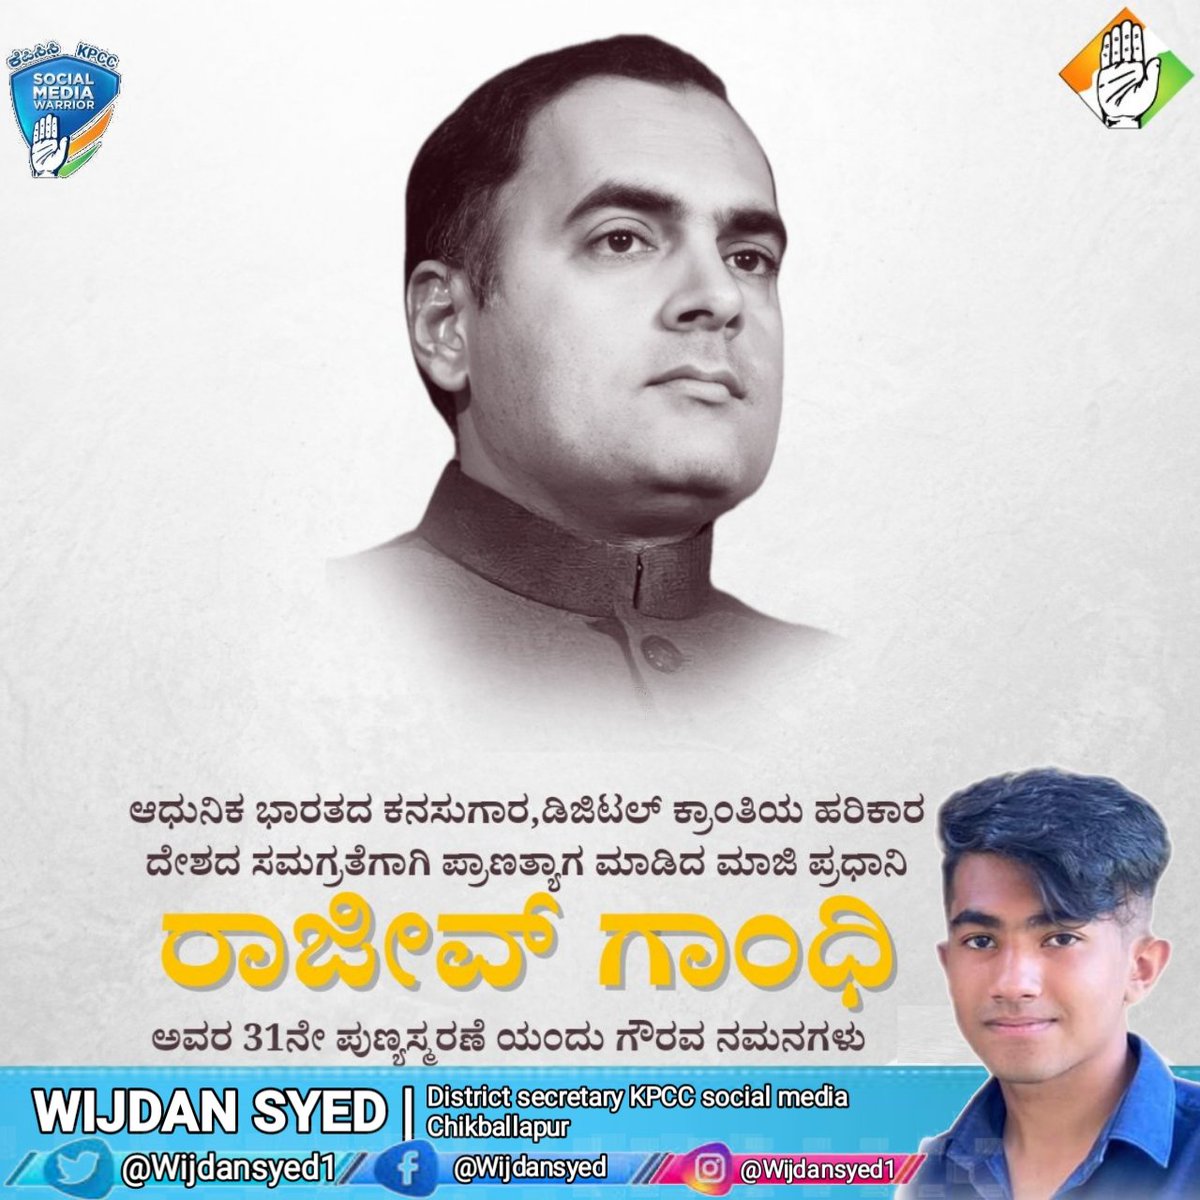 Founder of the Digital Revolution of India, Founder of Modern India,

 Devoted their lives to the unity and integrity of the country,

 We commemorate former Prime Minister 'Rajiv Gandhi' as a tribute to him.  
#RajivGandhiDeathAnniversary